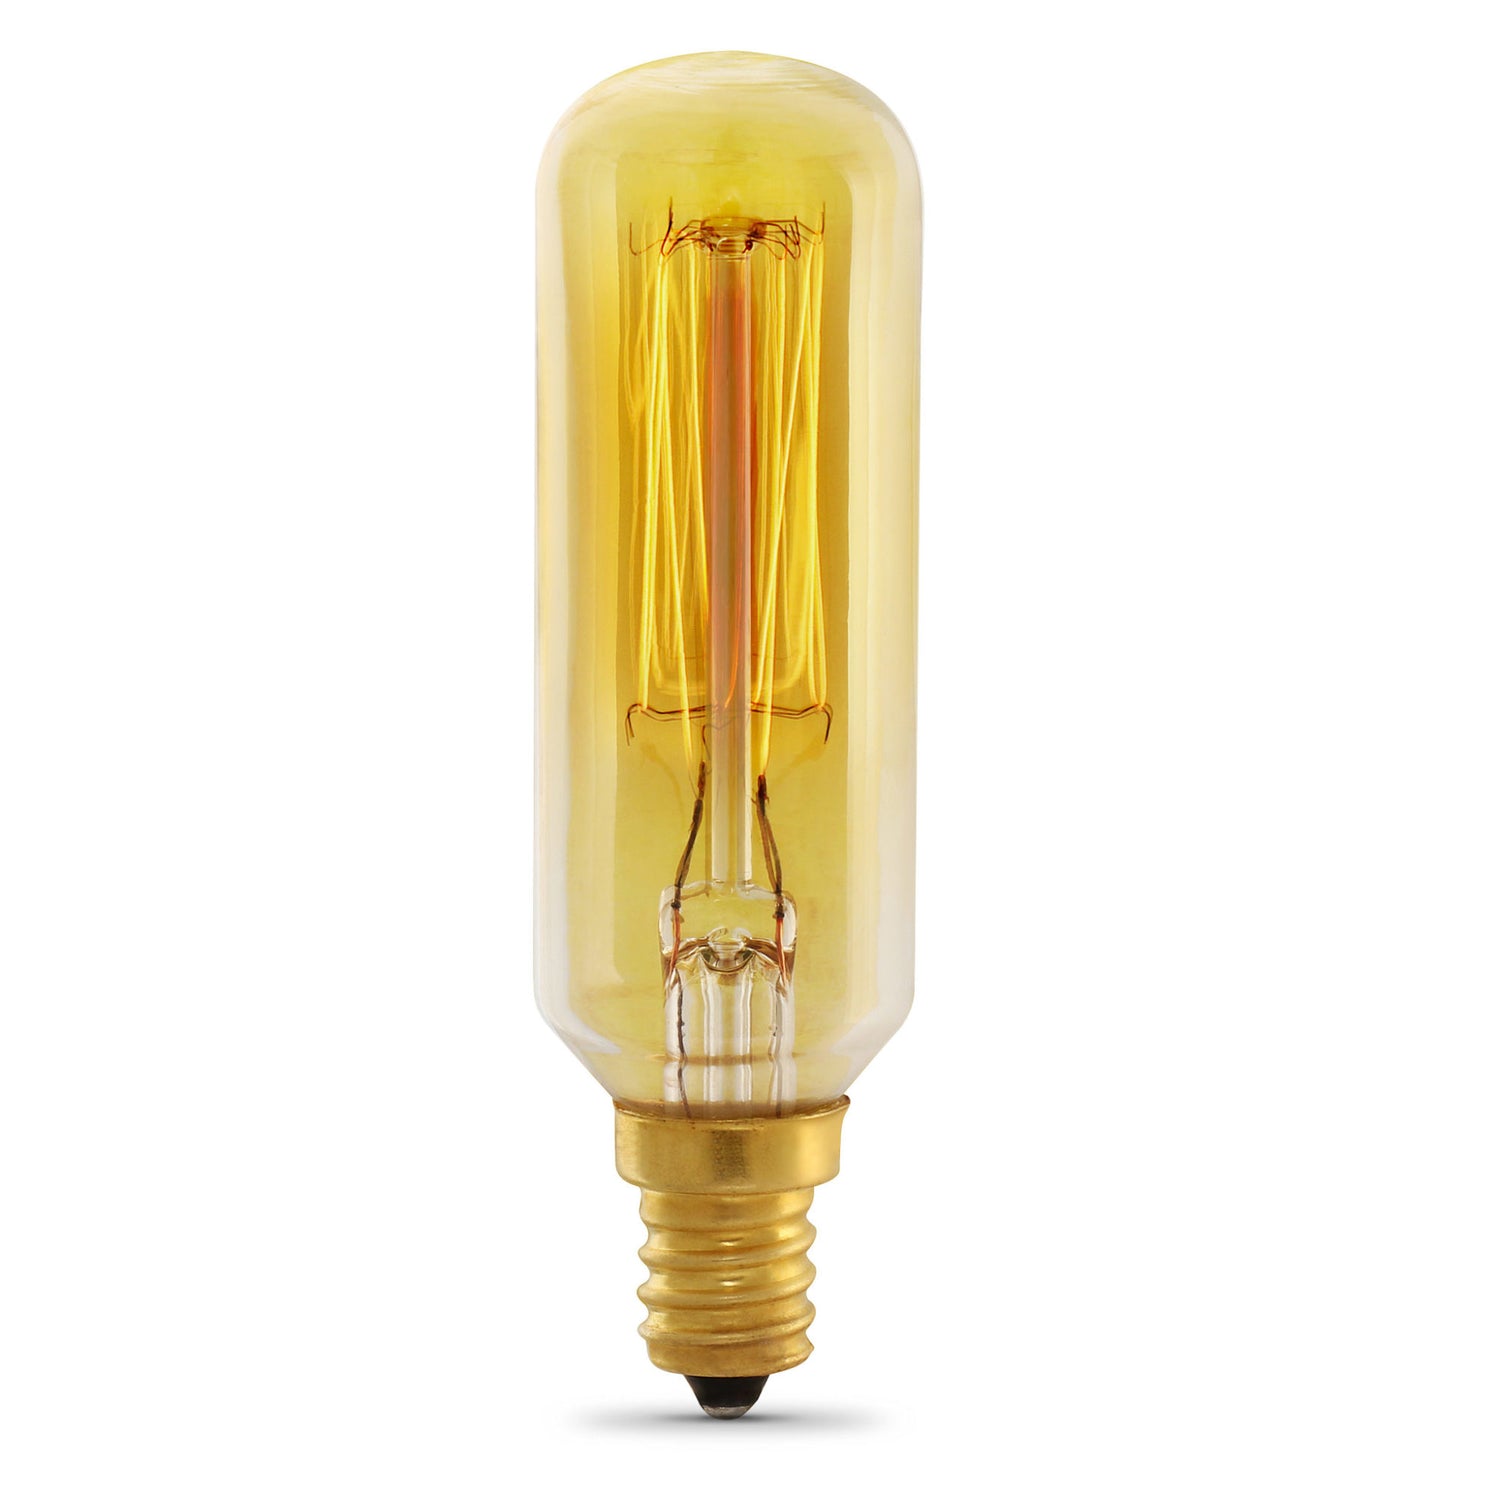 40W Replacement T8 E12 Dimmable Filament Amber Glass Vintage Edison Incandescent Light Bulb, Soft White